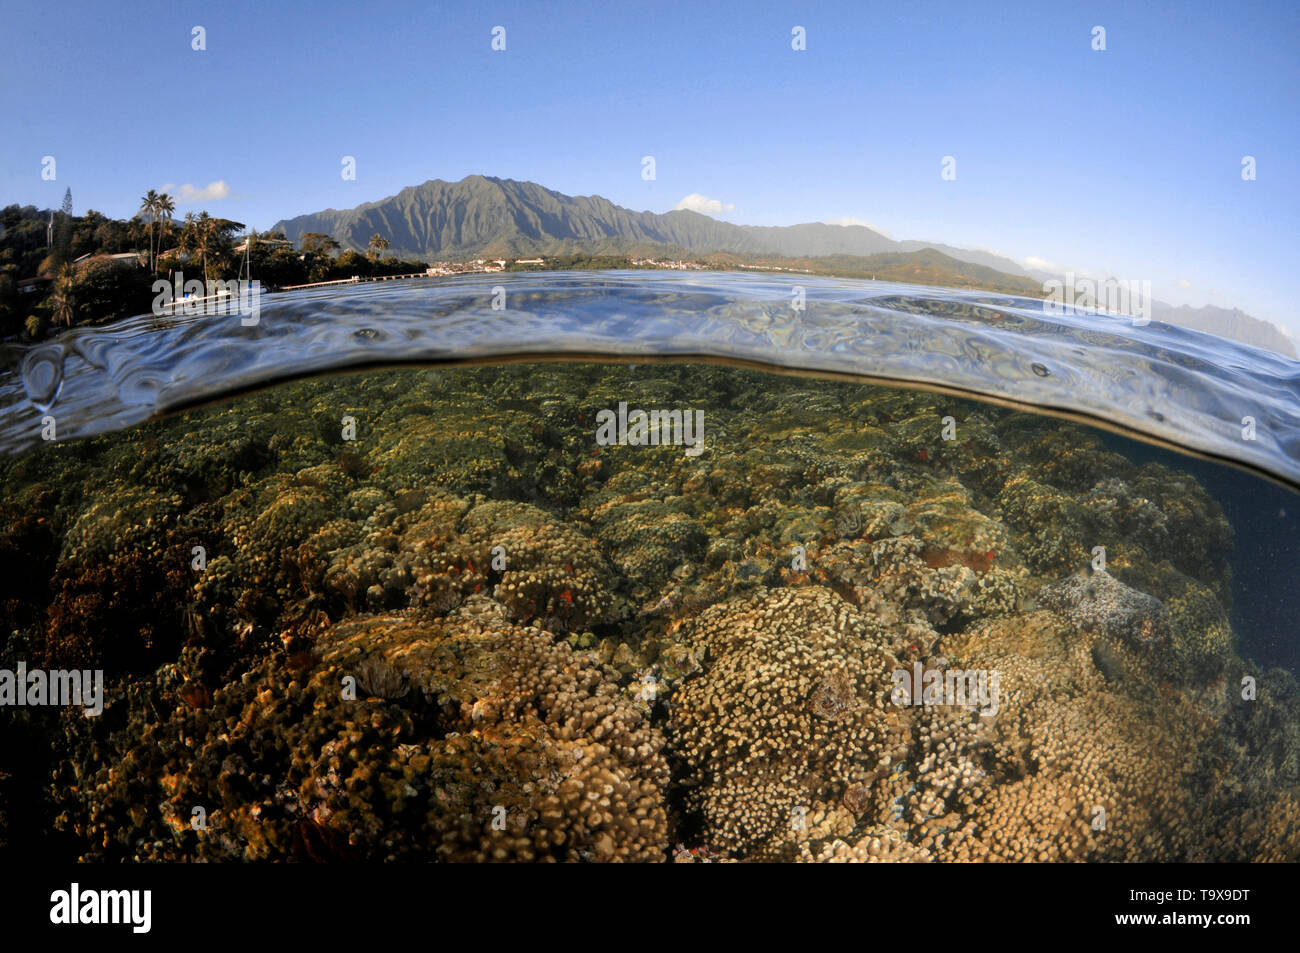 Split image of coral formations near the coast and the Koolau mountains in the background, Kaneohe Bay, Oahu, Hawaii, USA Stock Photo